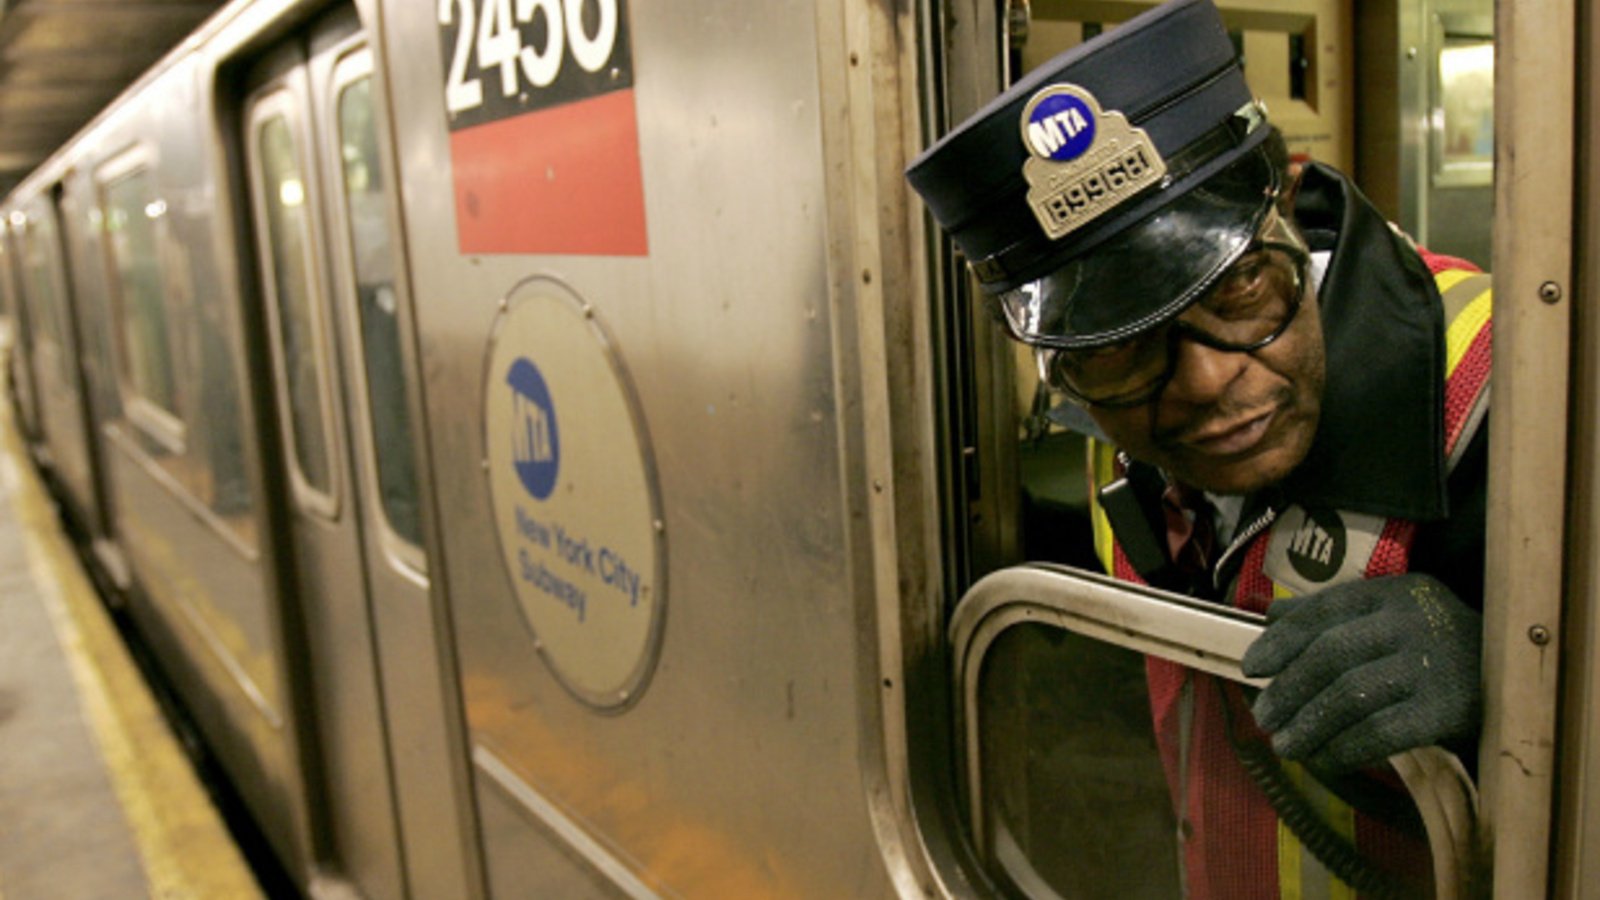 Morning Brief: Why Do U.S. Subways Still Have Drivers? | Council on Foreign  Relations